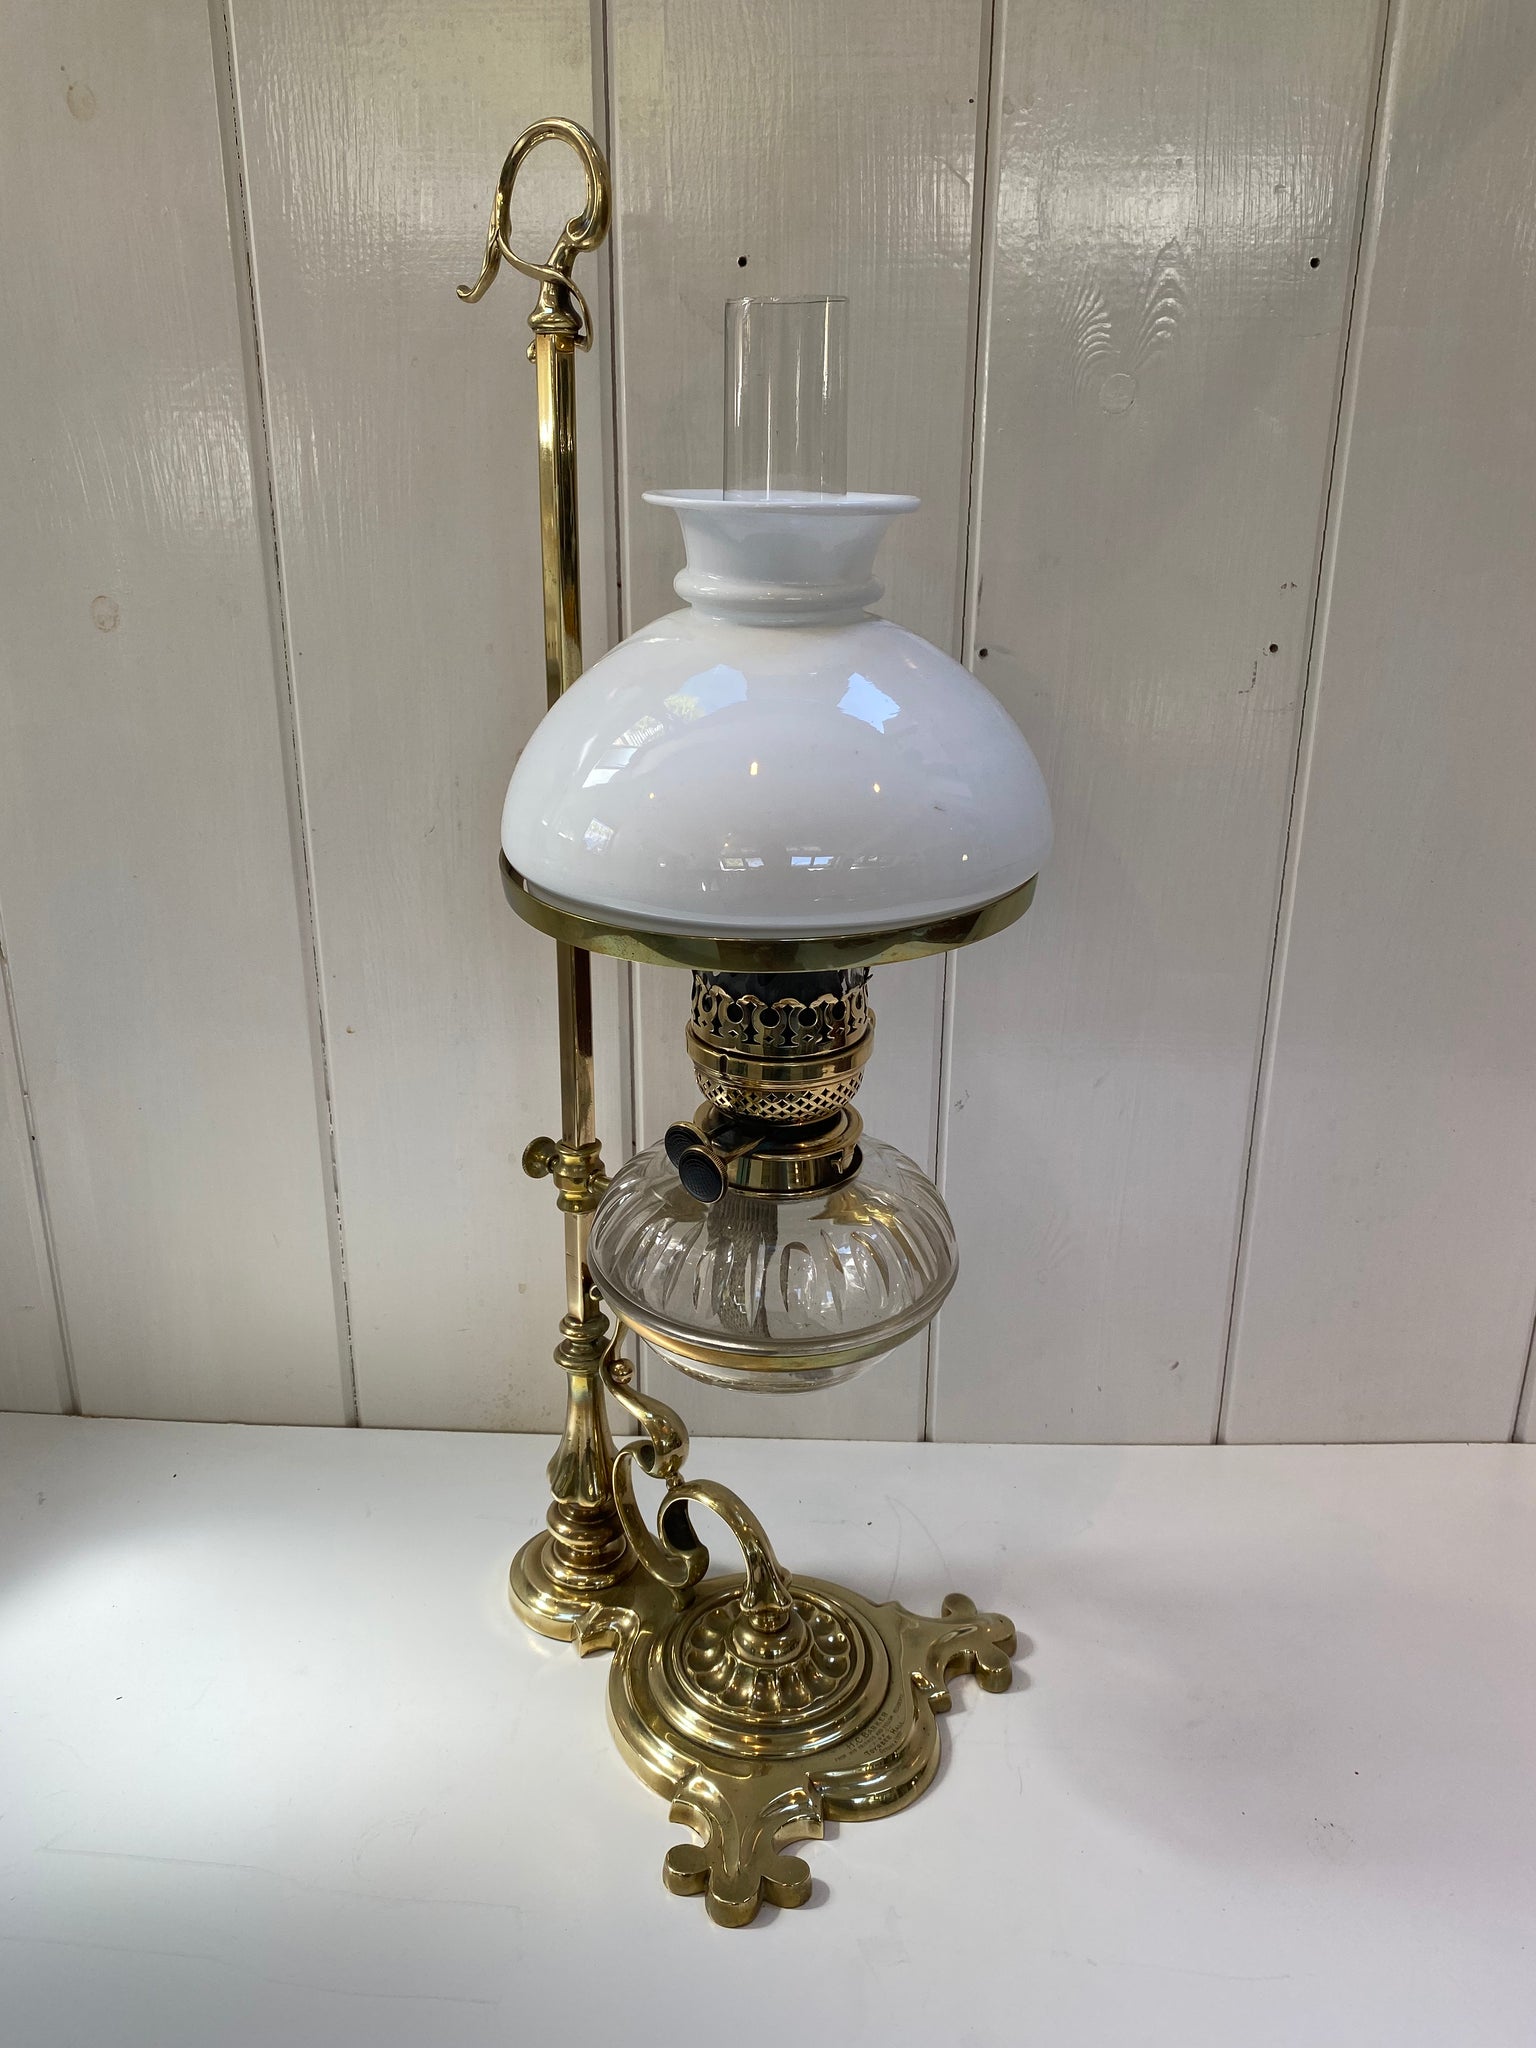 'Art Nouveau' Student Oil Lamp C.1905 in Un-Lacquered Polished Brass